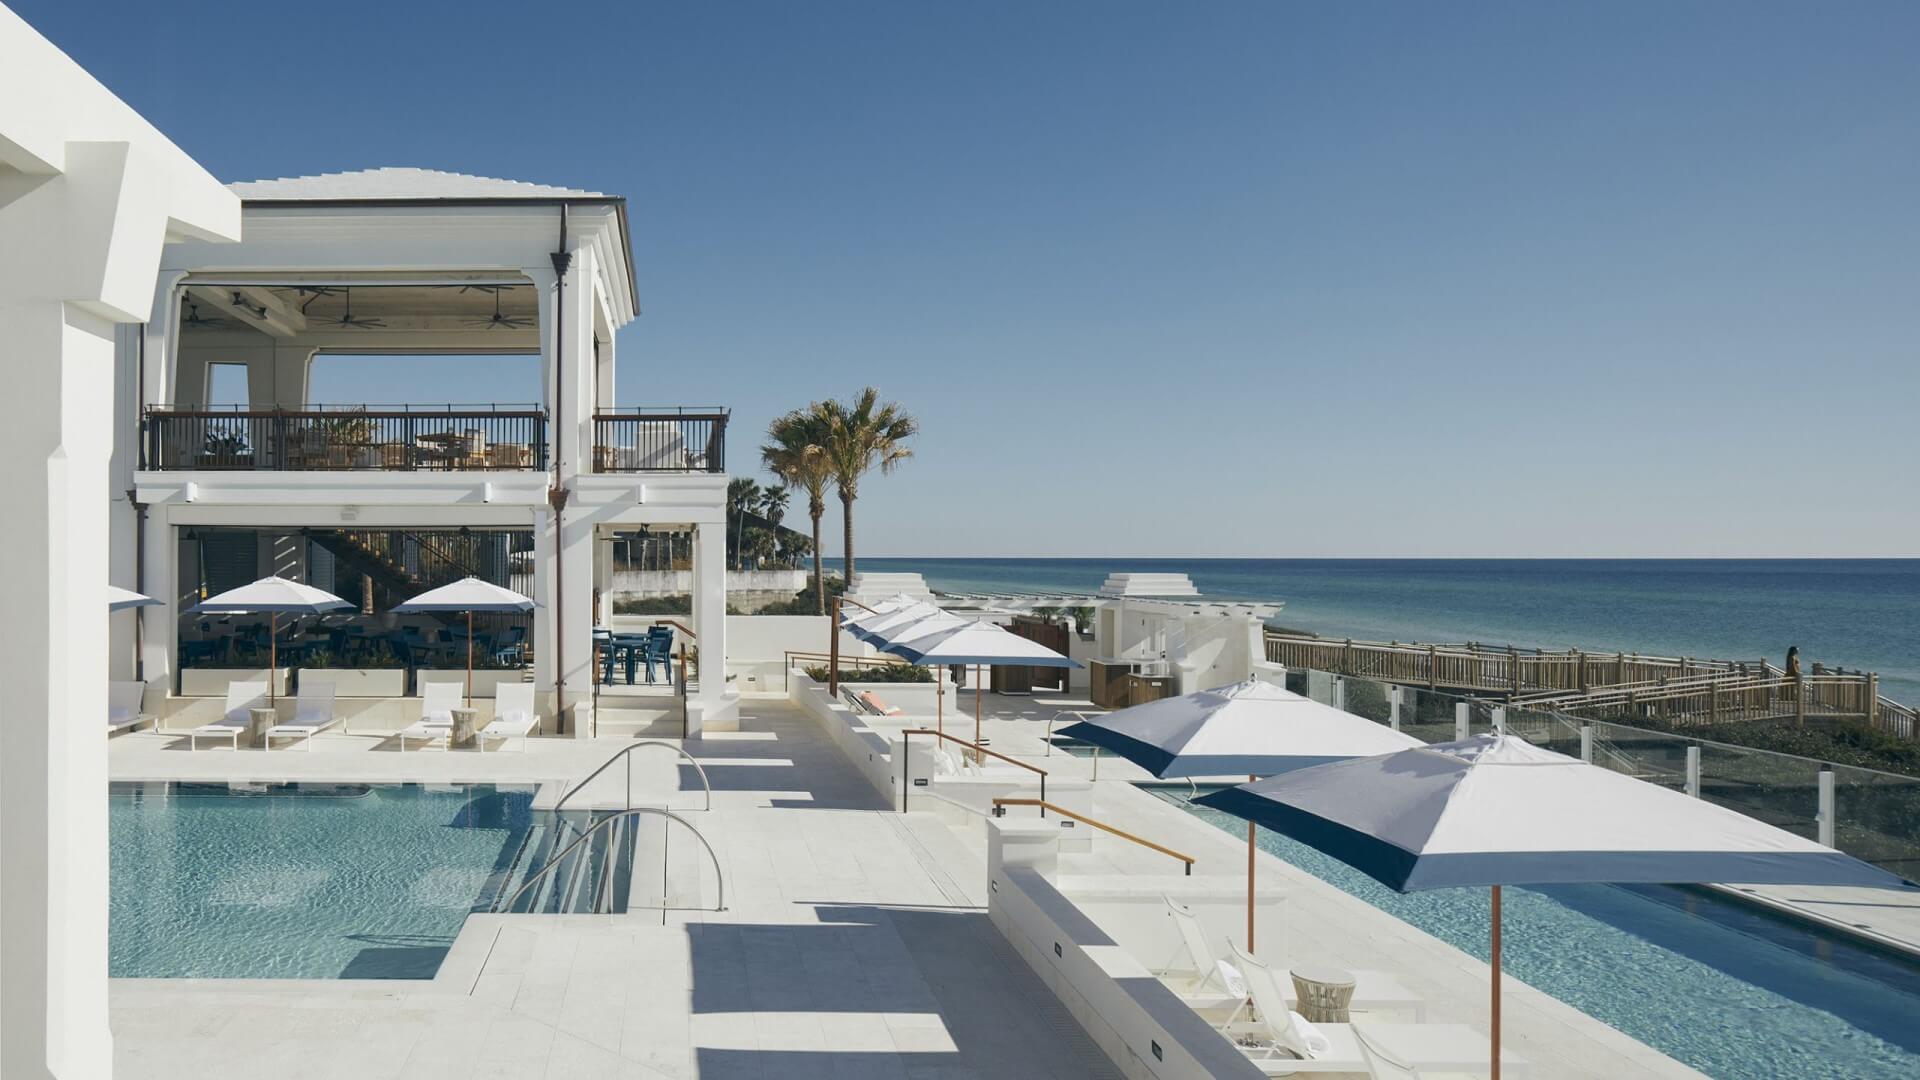 Alys Beach pool spans two levels with hot tubs below.